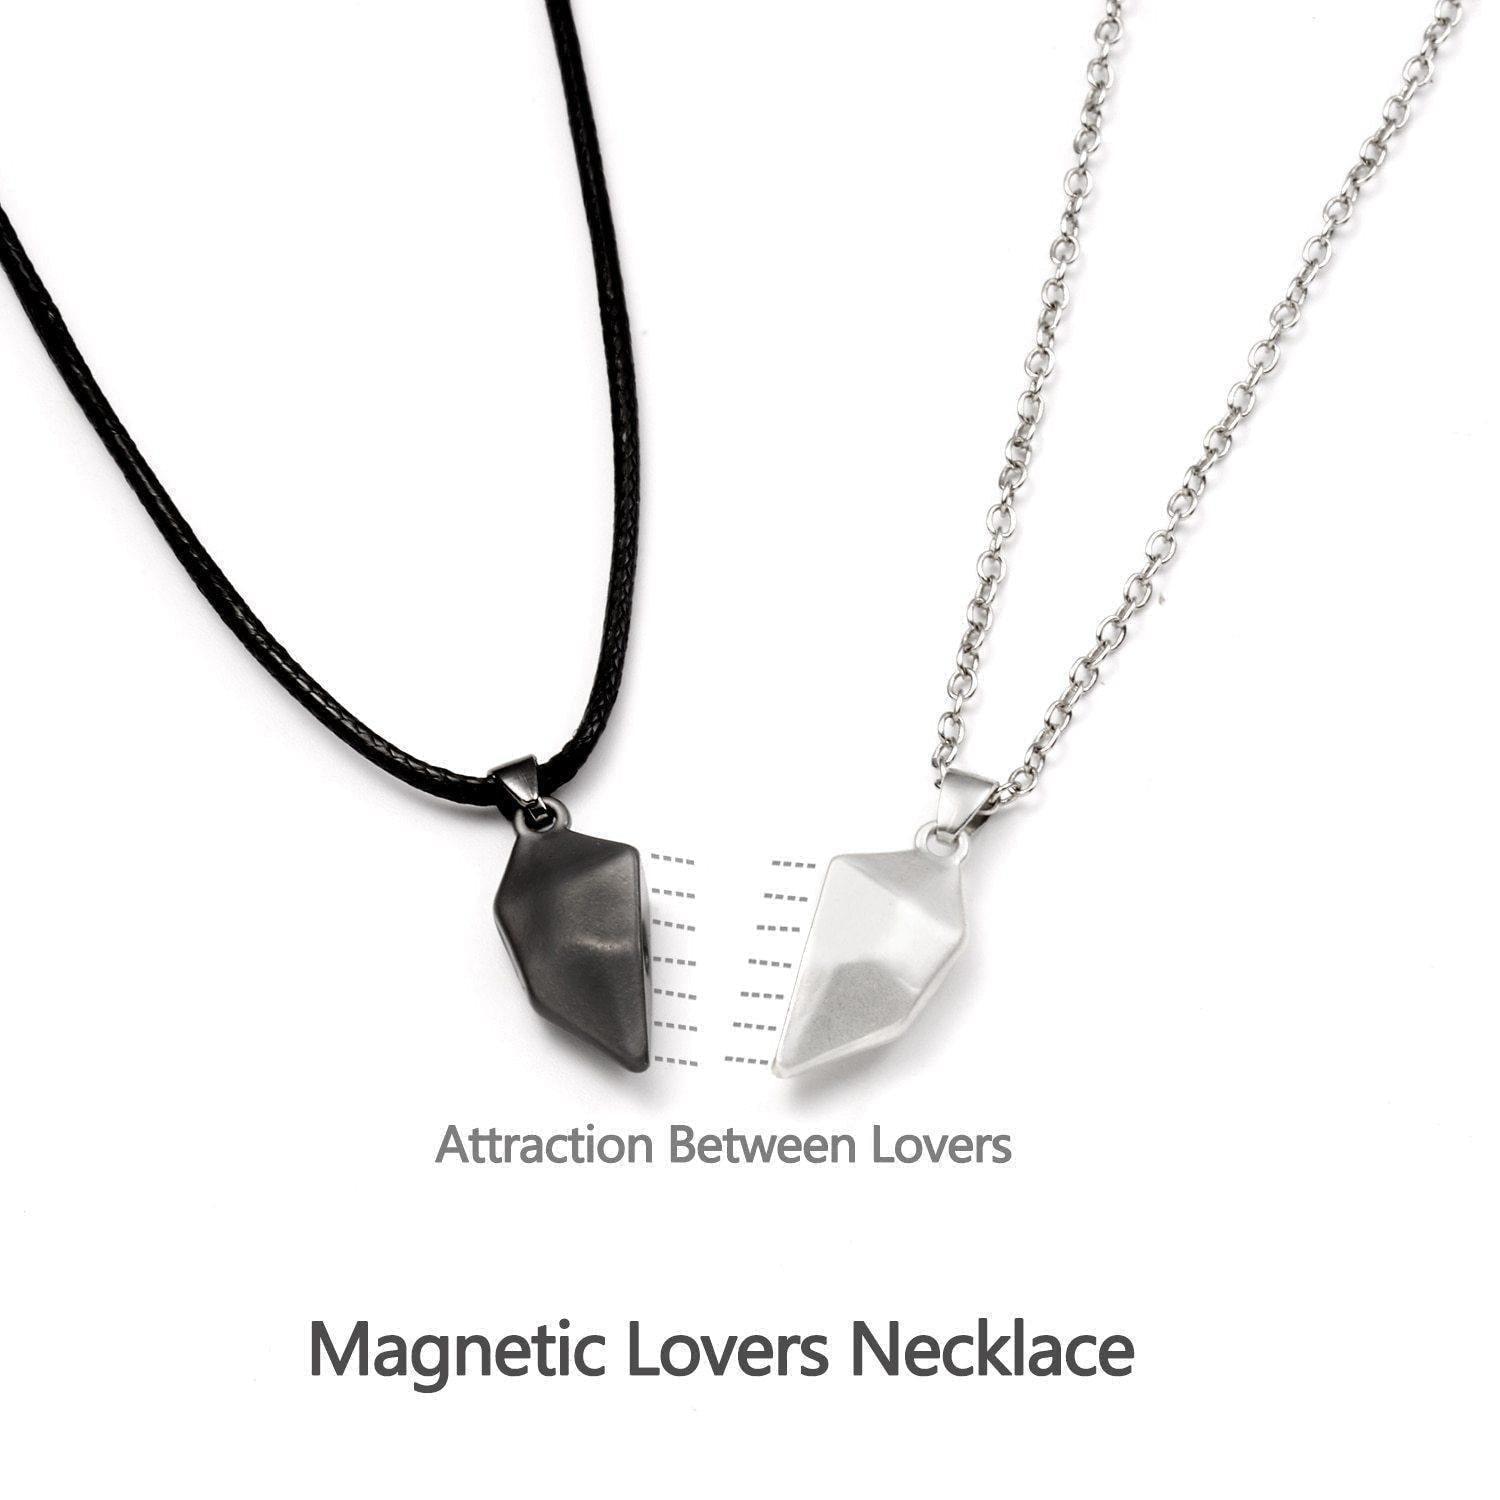 Matching Relationship Necklaces for Husband From Wife in 2023 | Matching Relationship Necklaces for Husband From Wife - undefined | birthday gift for hubby, birthday ideas for husband, husband gift ideas, Matching Relationship Necklaces for Husband, My Husband Necklace | From Hunny Life | hunnylife.com